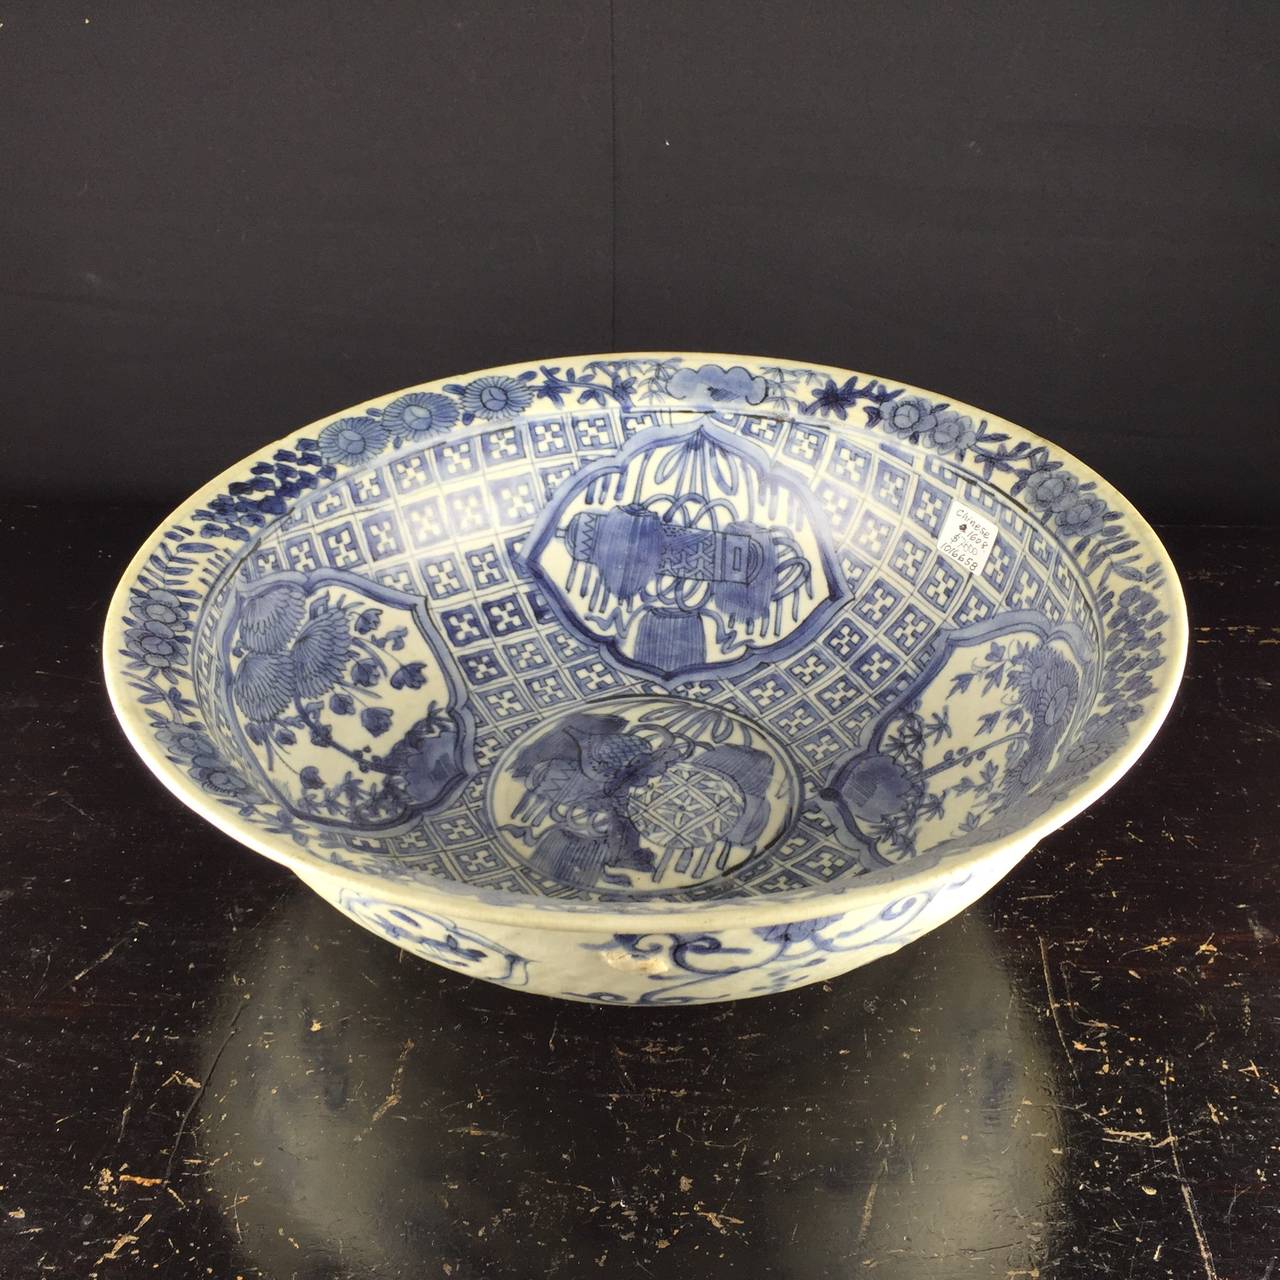 Large Ming porcelain bowl, recovered from the Binh Thuan shipwreck, Vietnam, painted with reserves of flowers and Buddhist symbols, the rim with flowers and foliage. 
Ship wrecked, porcelain slightly earlier, circa 1608.

The Bihn Thuan Shipwreck